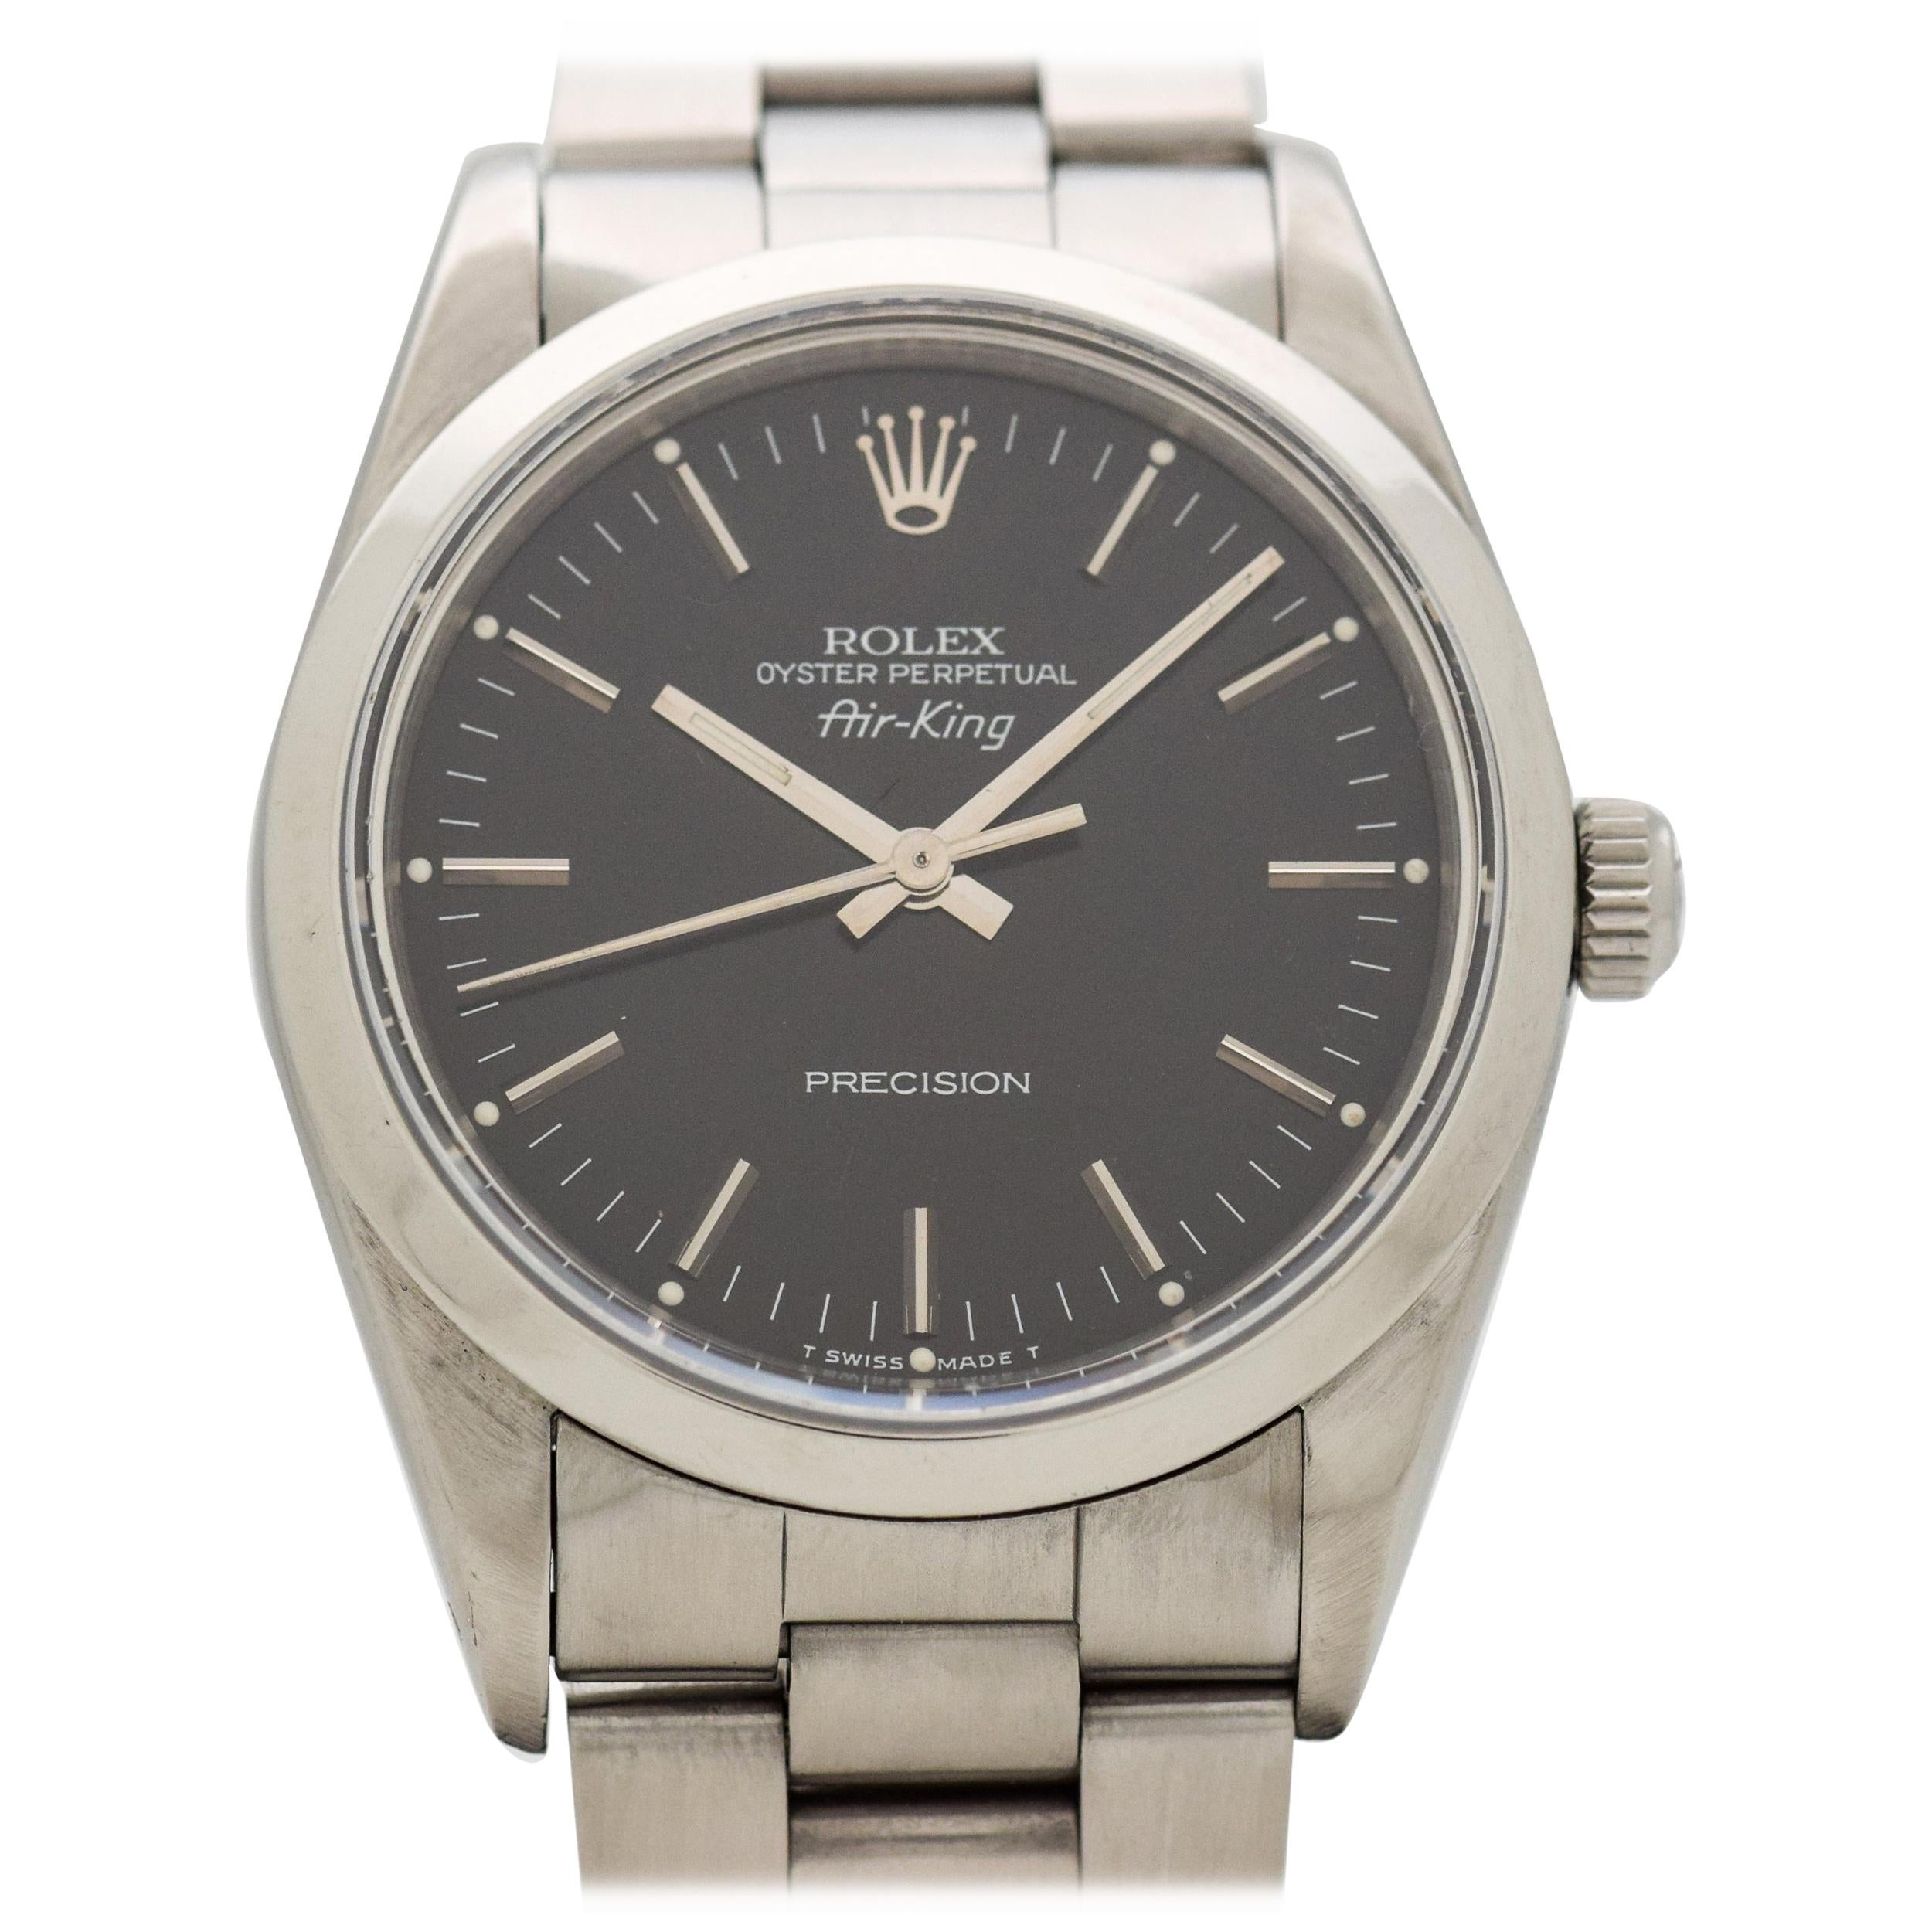 Vintage Rolex Air-King Reference 14000 Stainless Steel Watch, 1989 For Sale